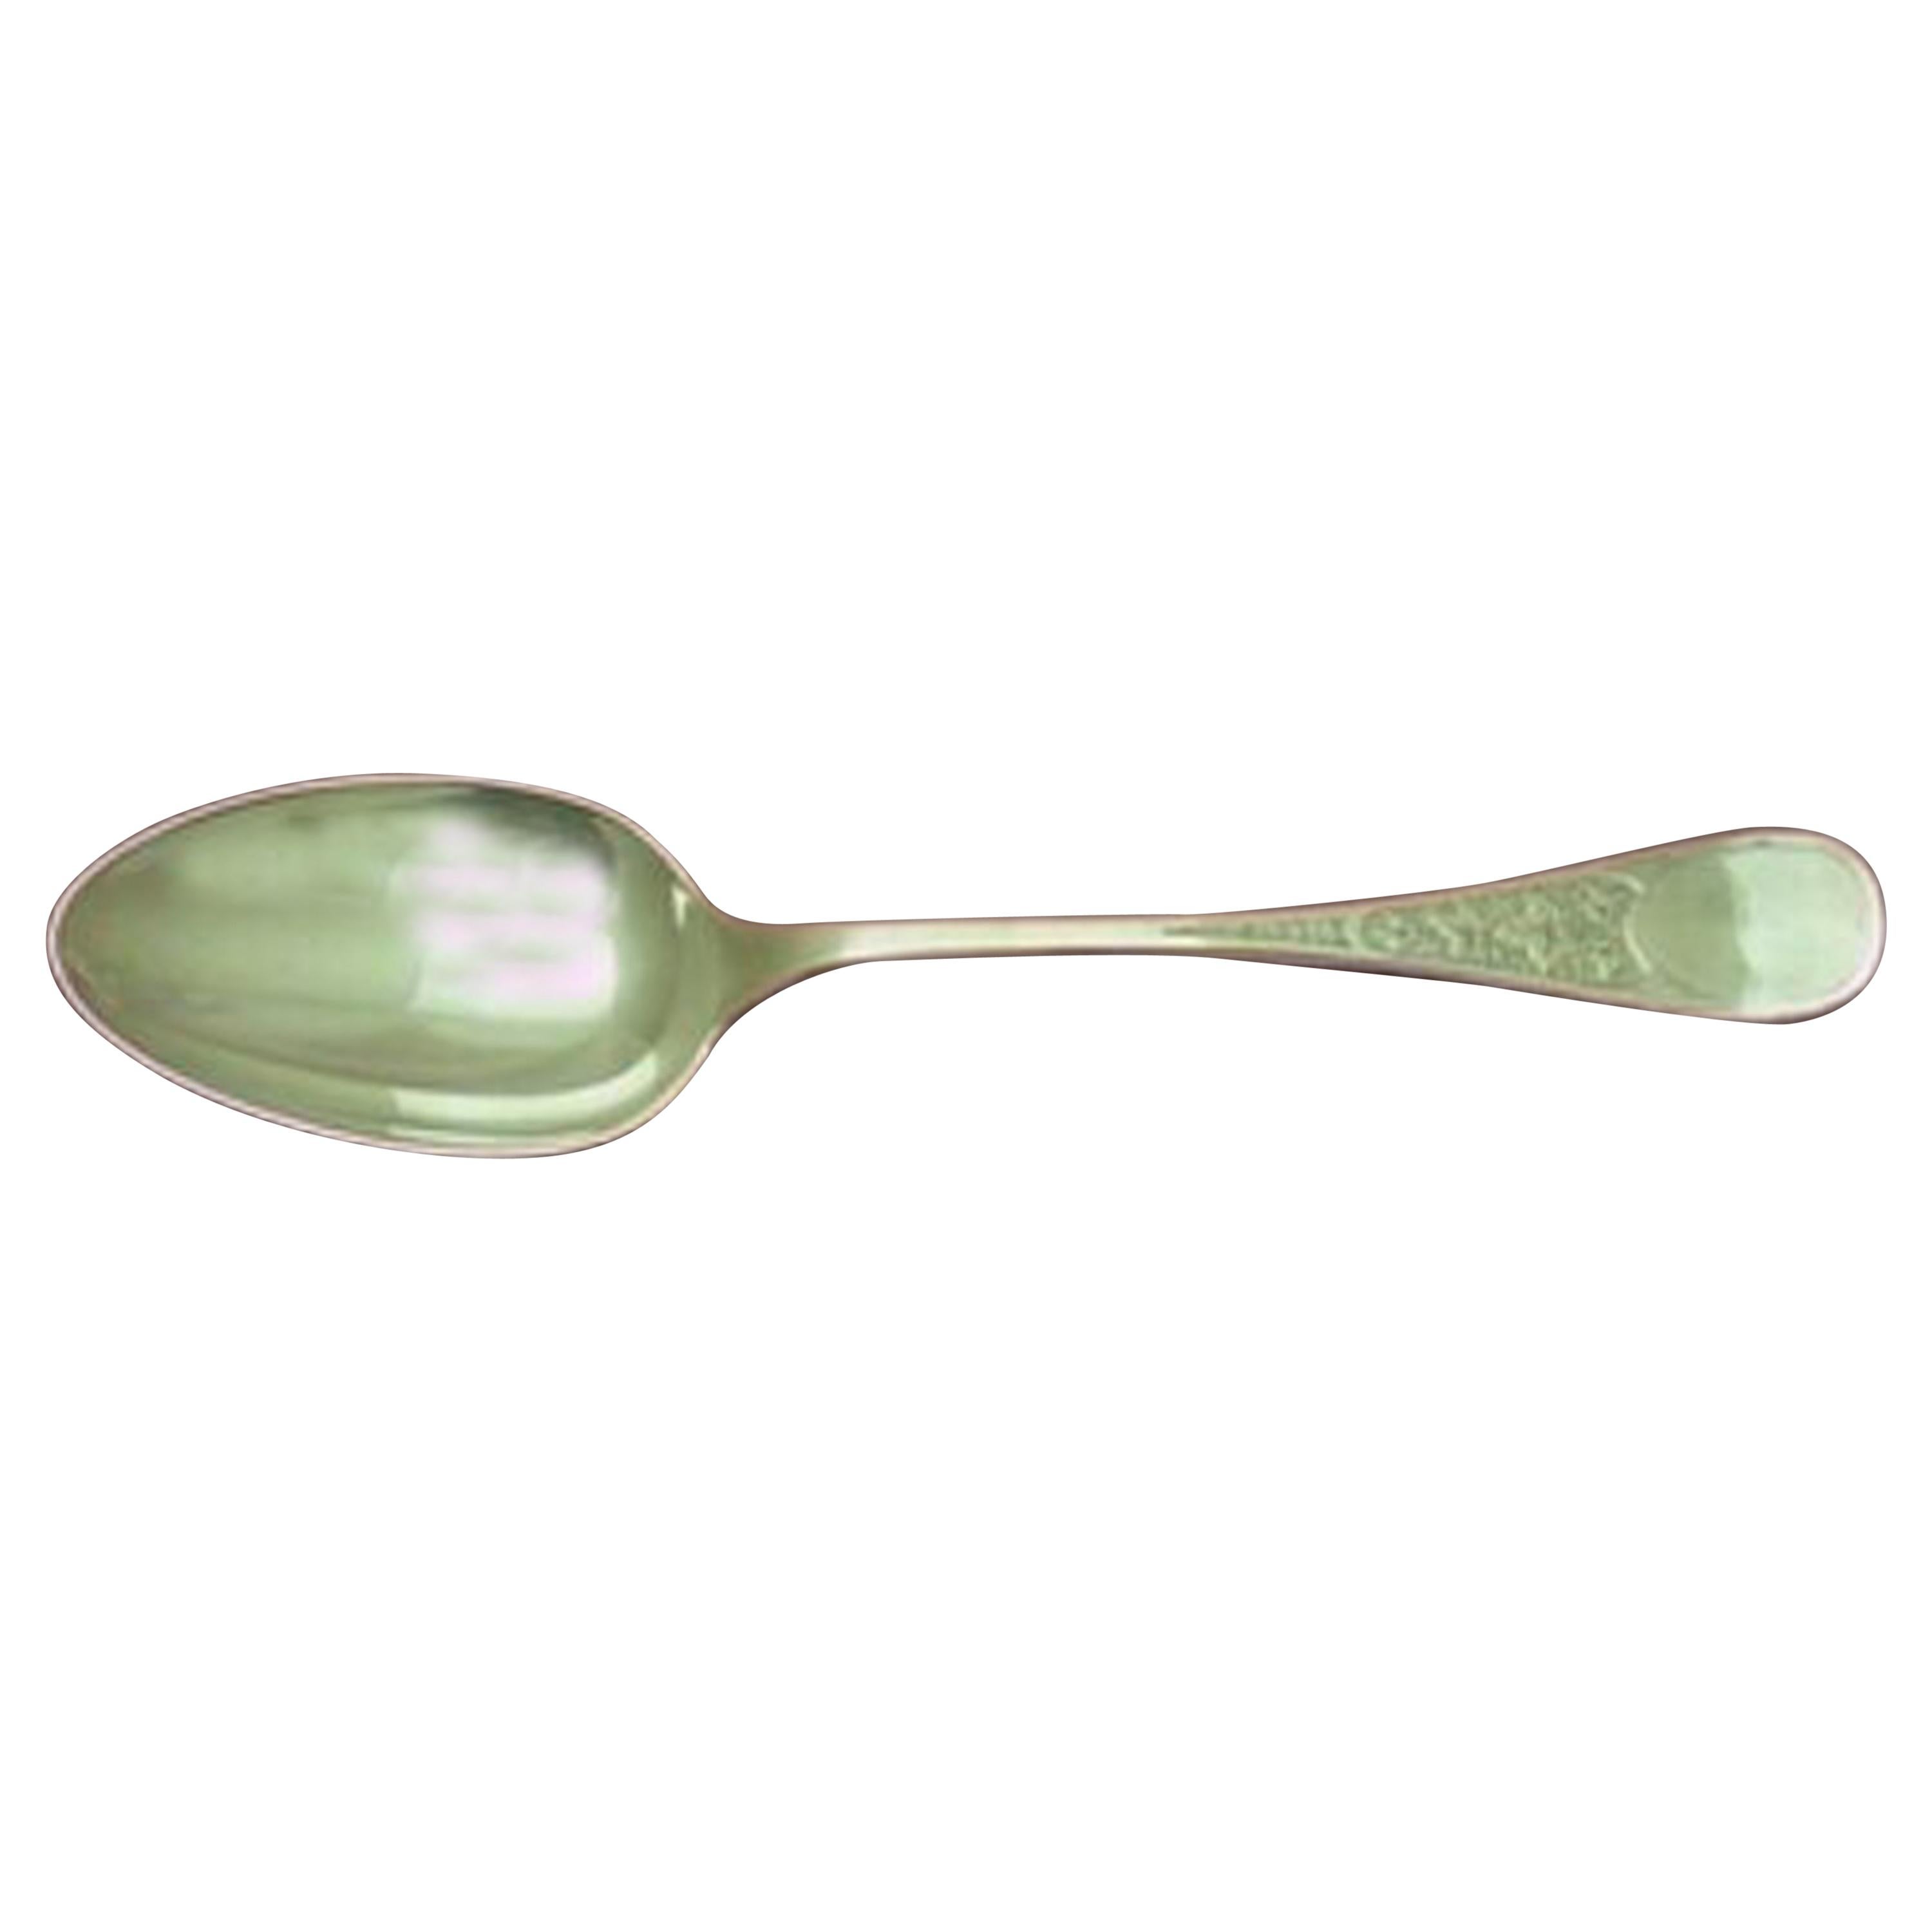 Ivy aka Antique Ivy Eng by Tiffany & Co. Sterling Silver Gravy Ladle